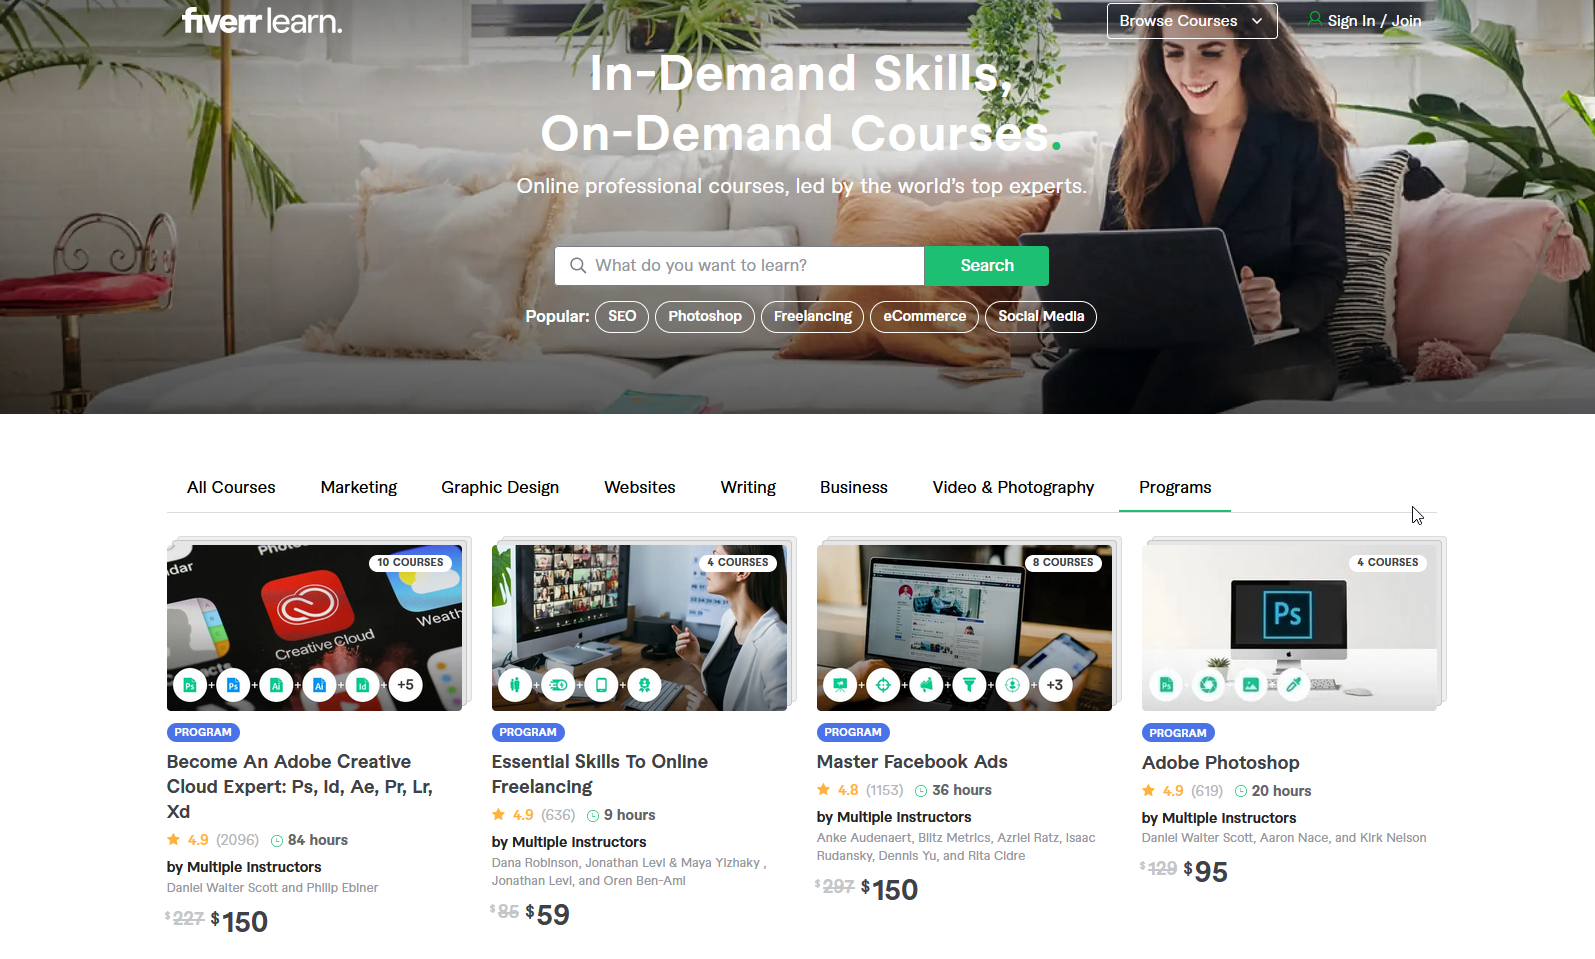 Online IT courses for beginners on Fiverr learn